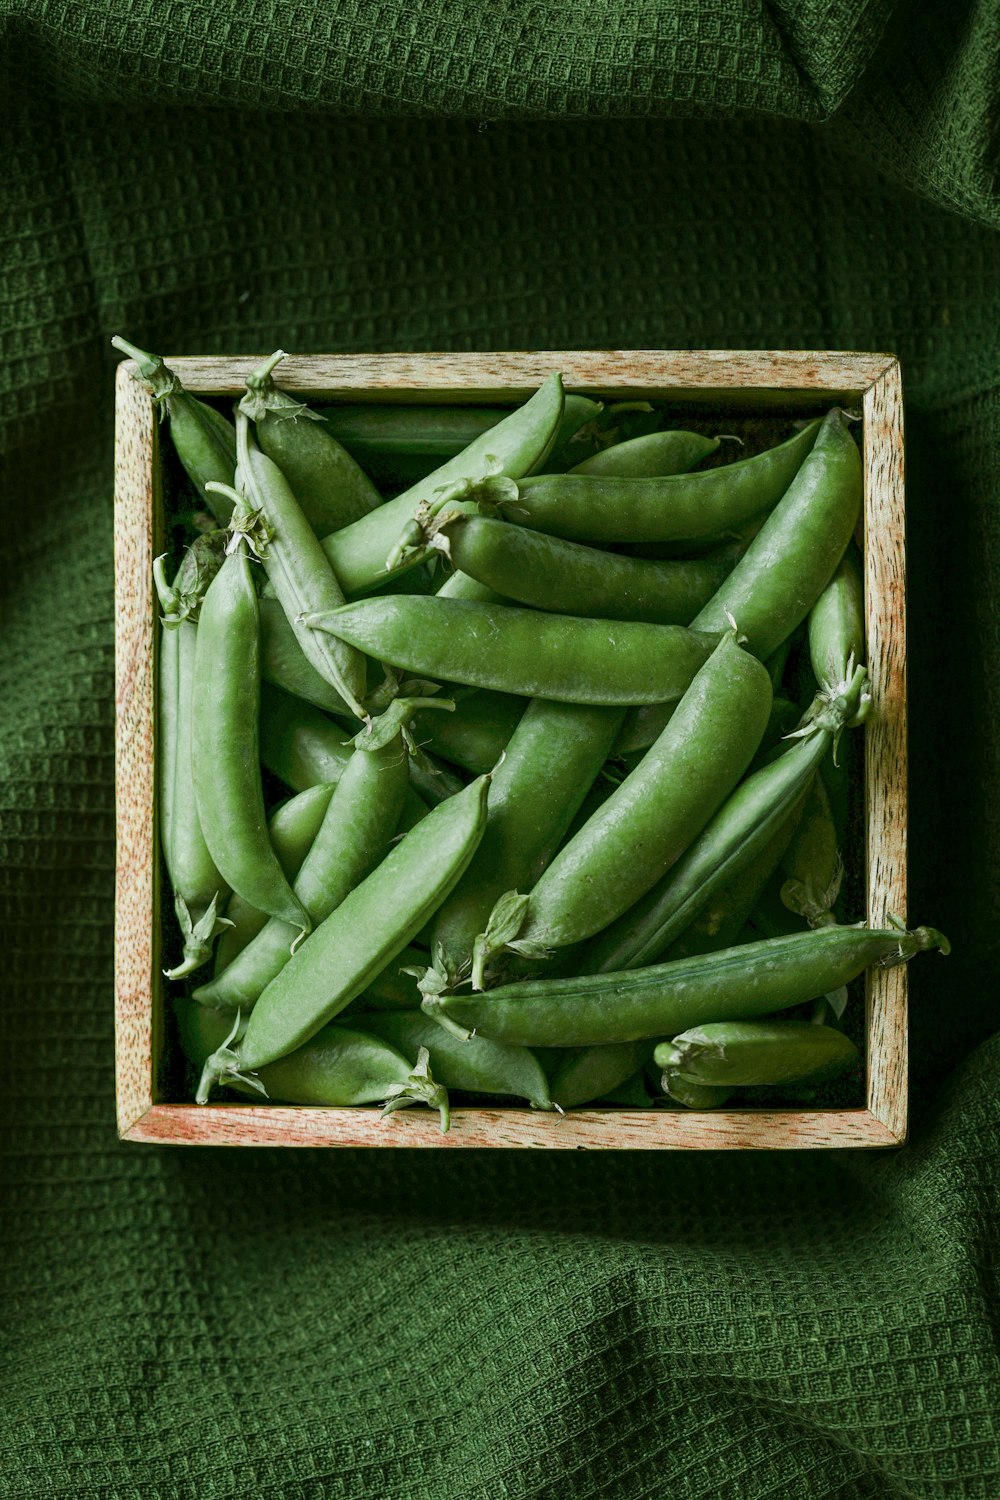 a wooden box filled with green beans on a green cloth